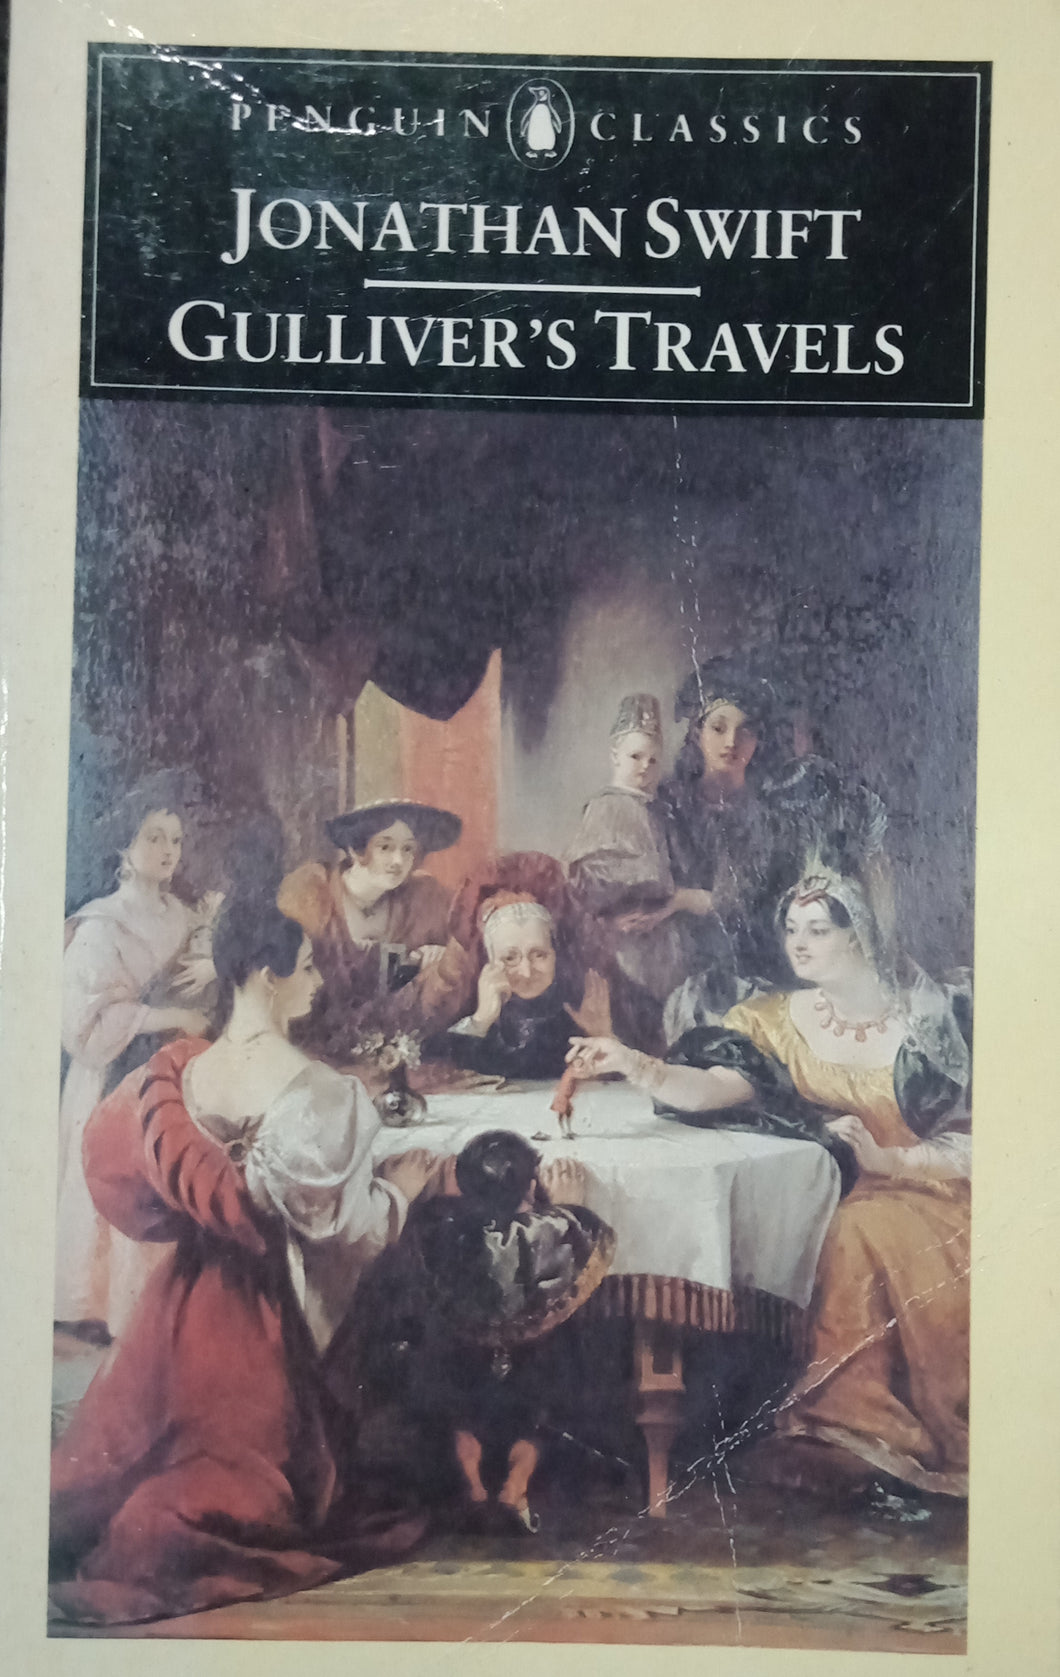 Gulliver's travels by Jonathan Swift